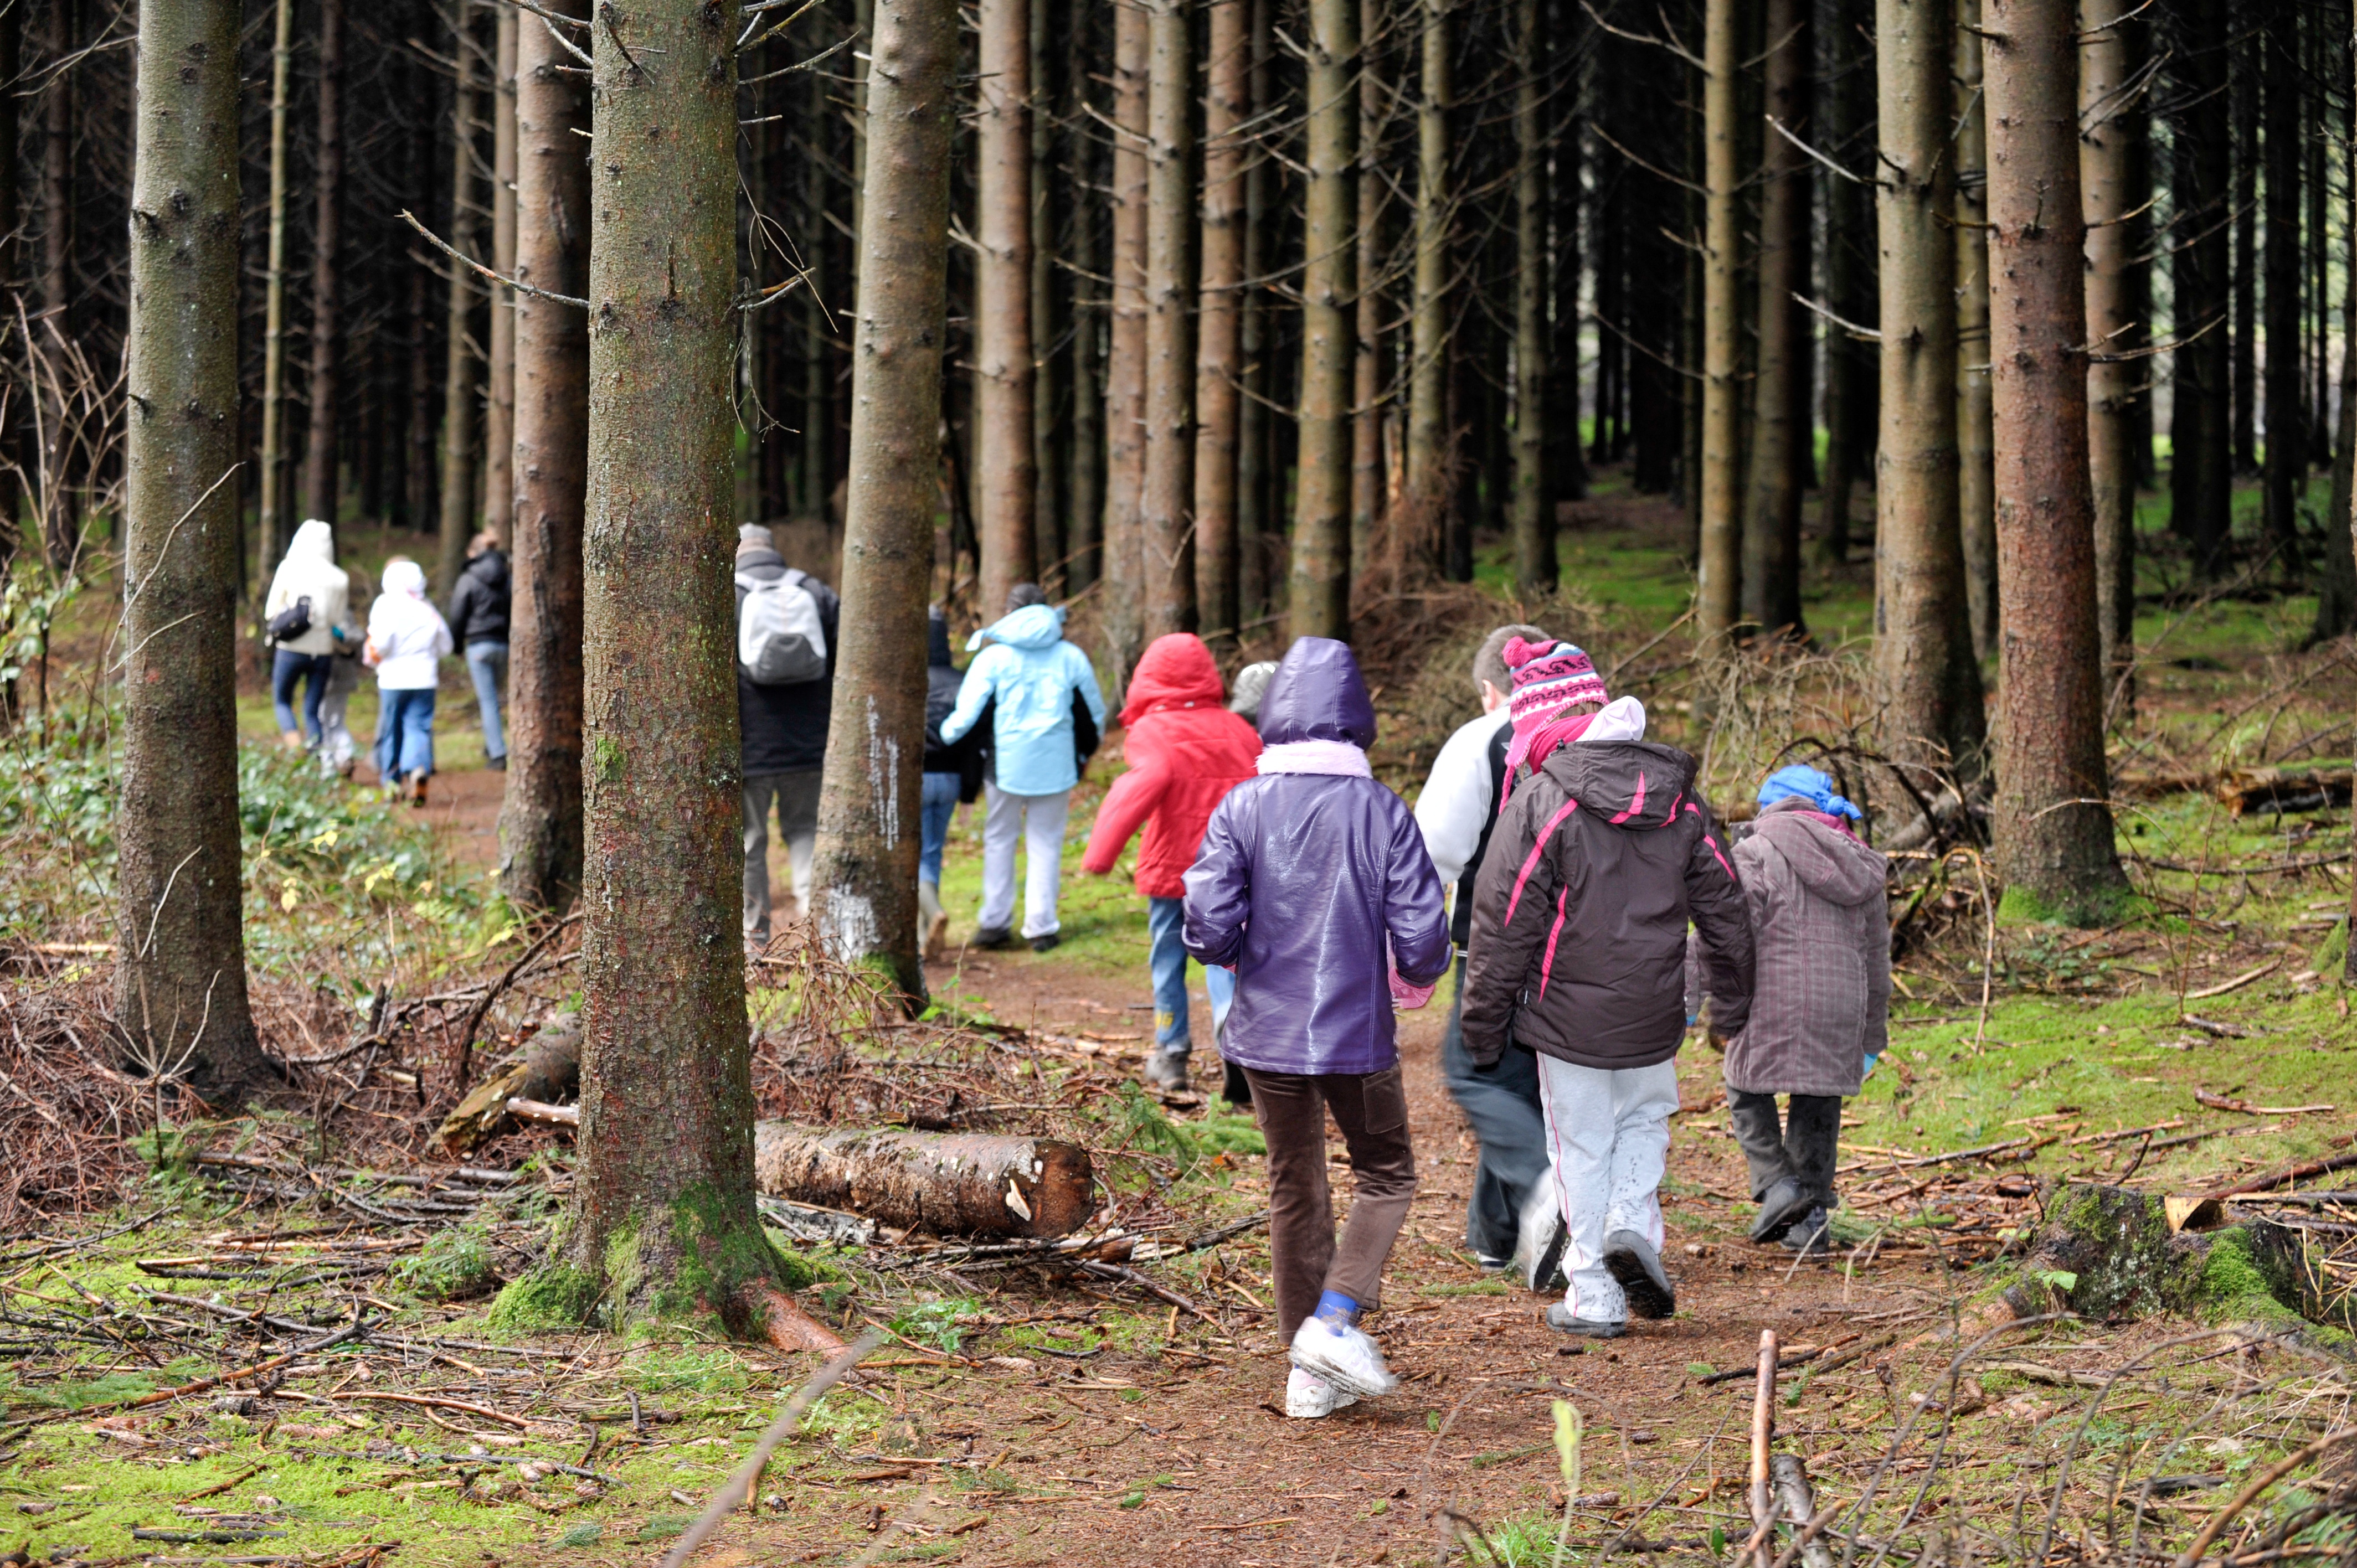 Students with jackets walking in woods